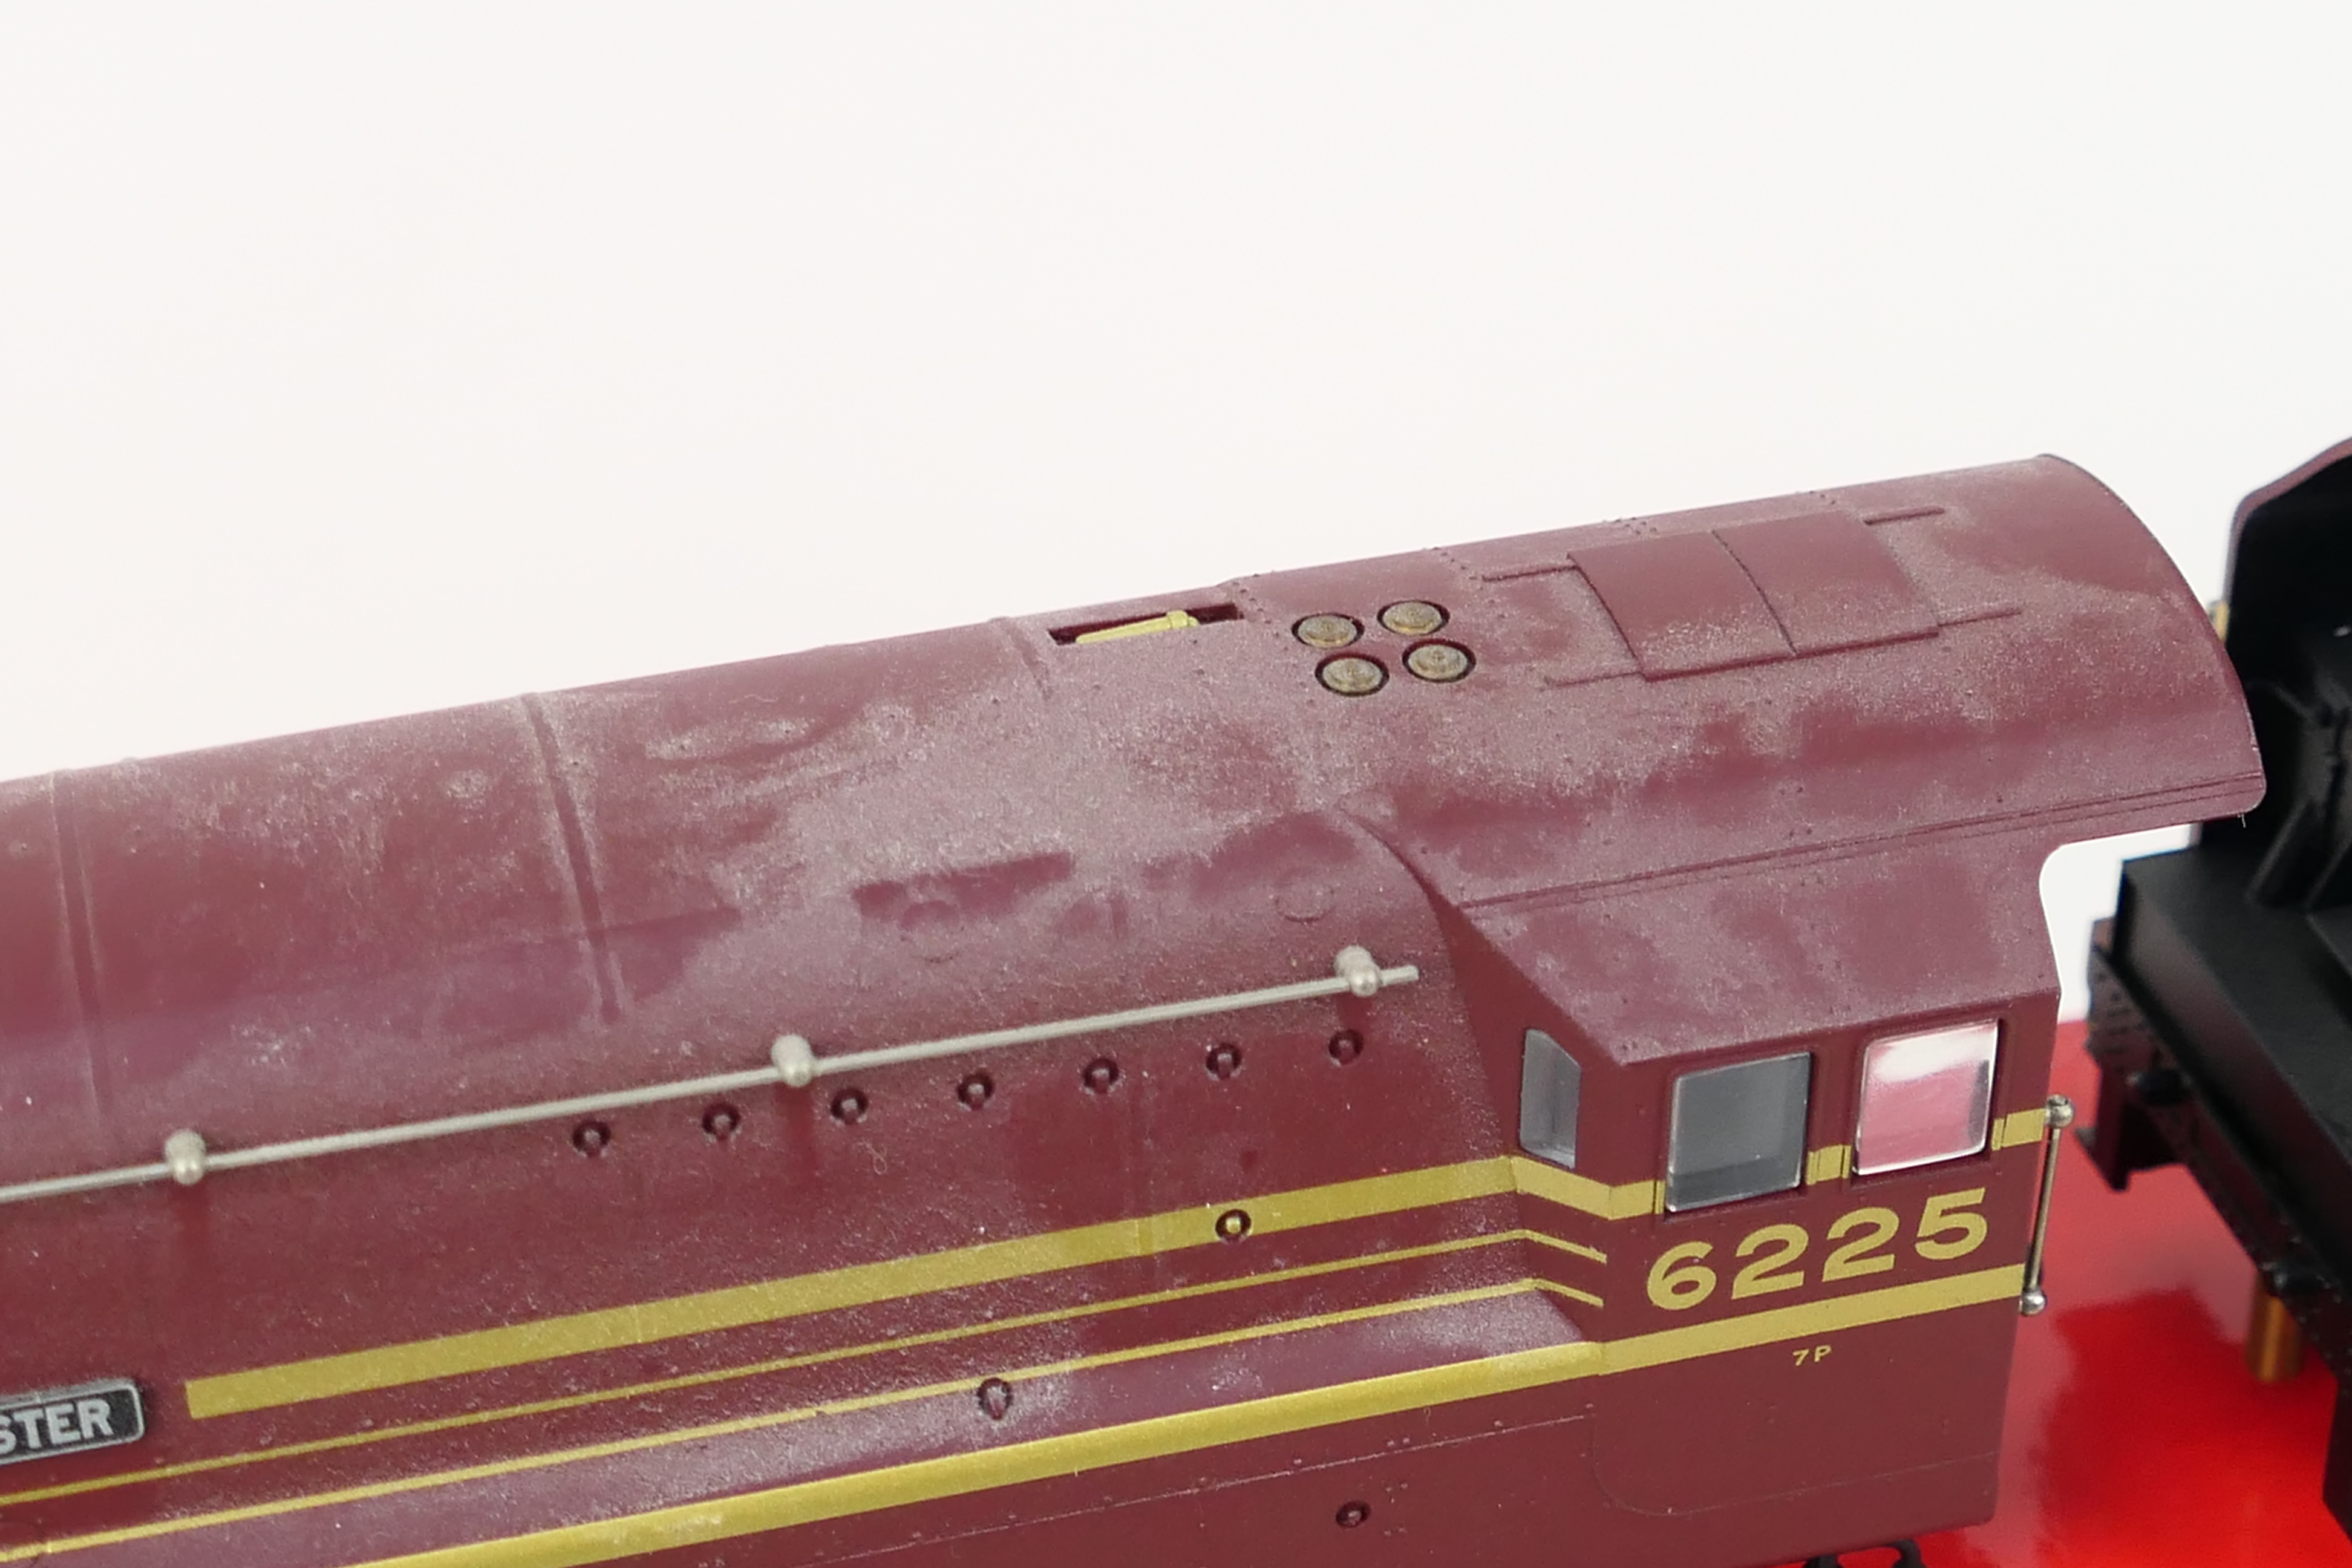 Hornby - A boxed Hornby SUPER DETAIL R2179 Coronation Class 4-6-2 steam locomotive and tender Op.No. - Image 4 of 4